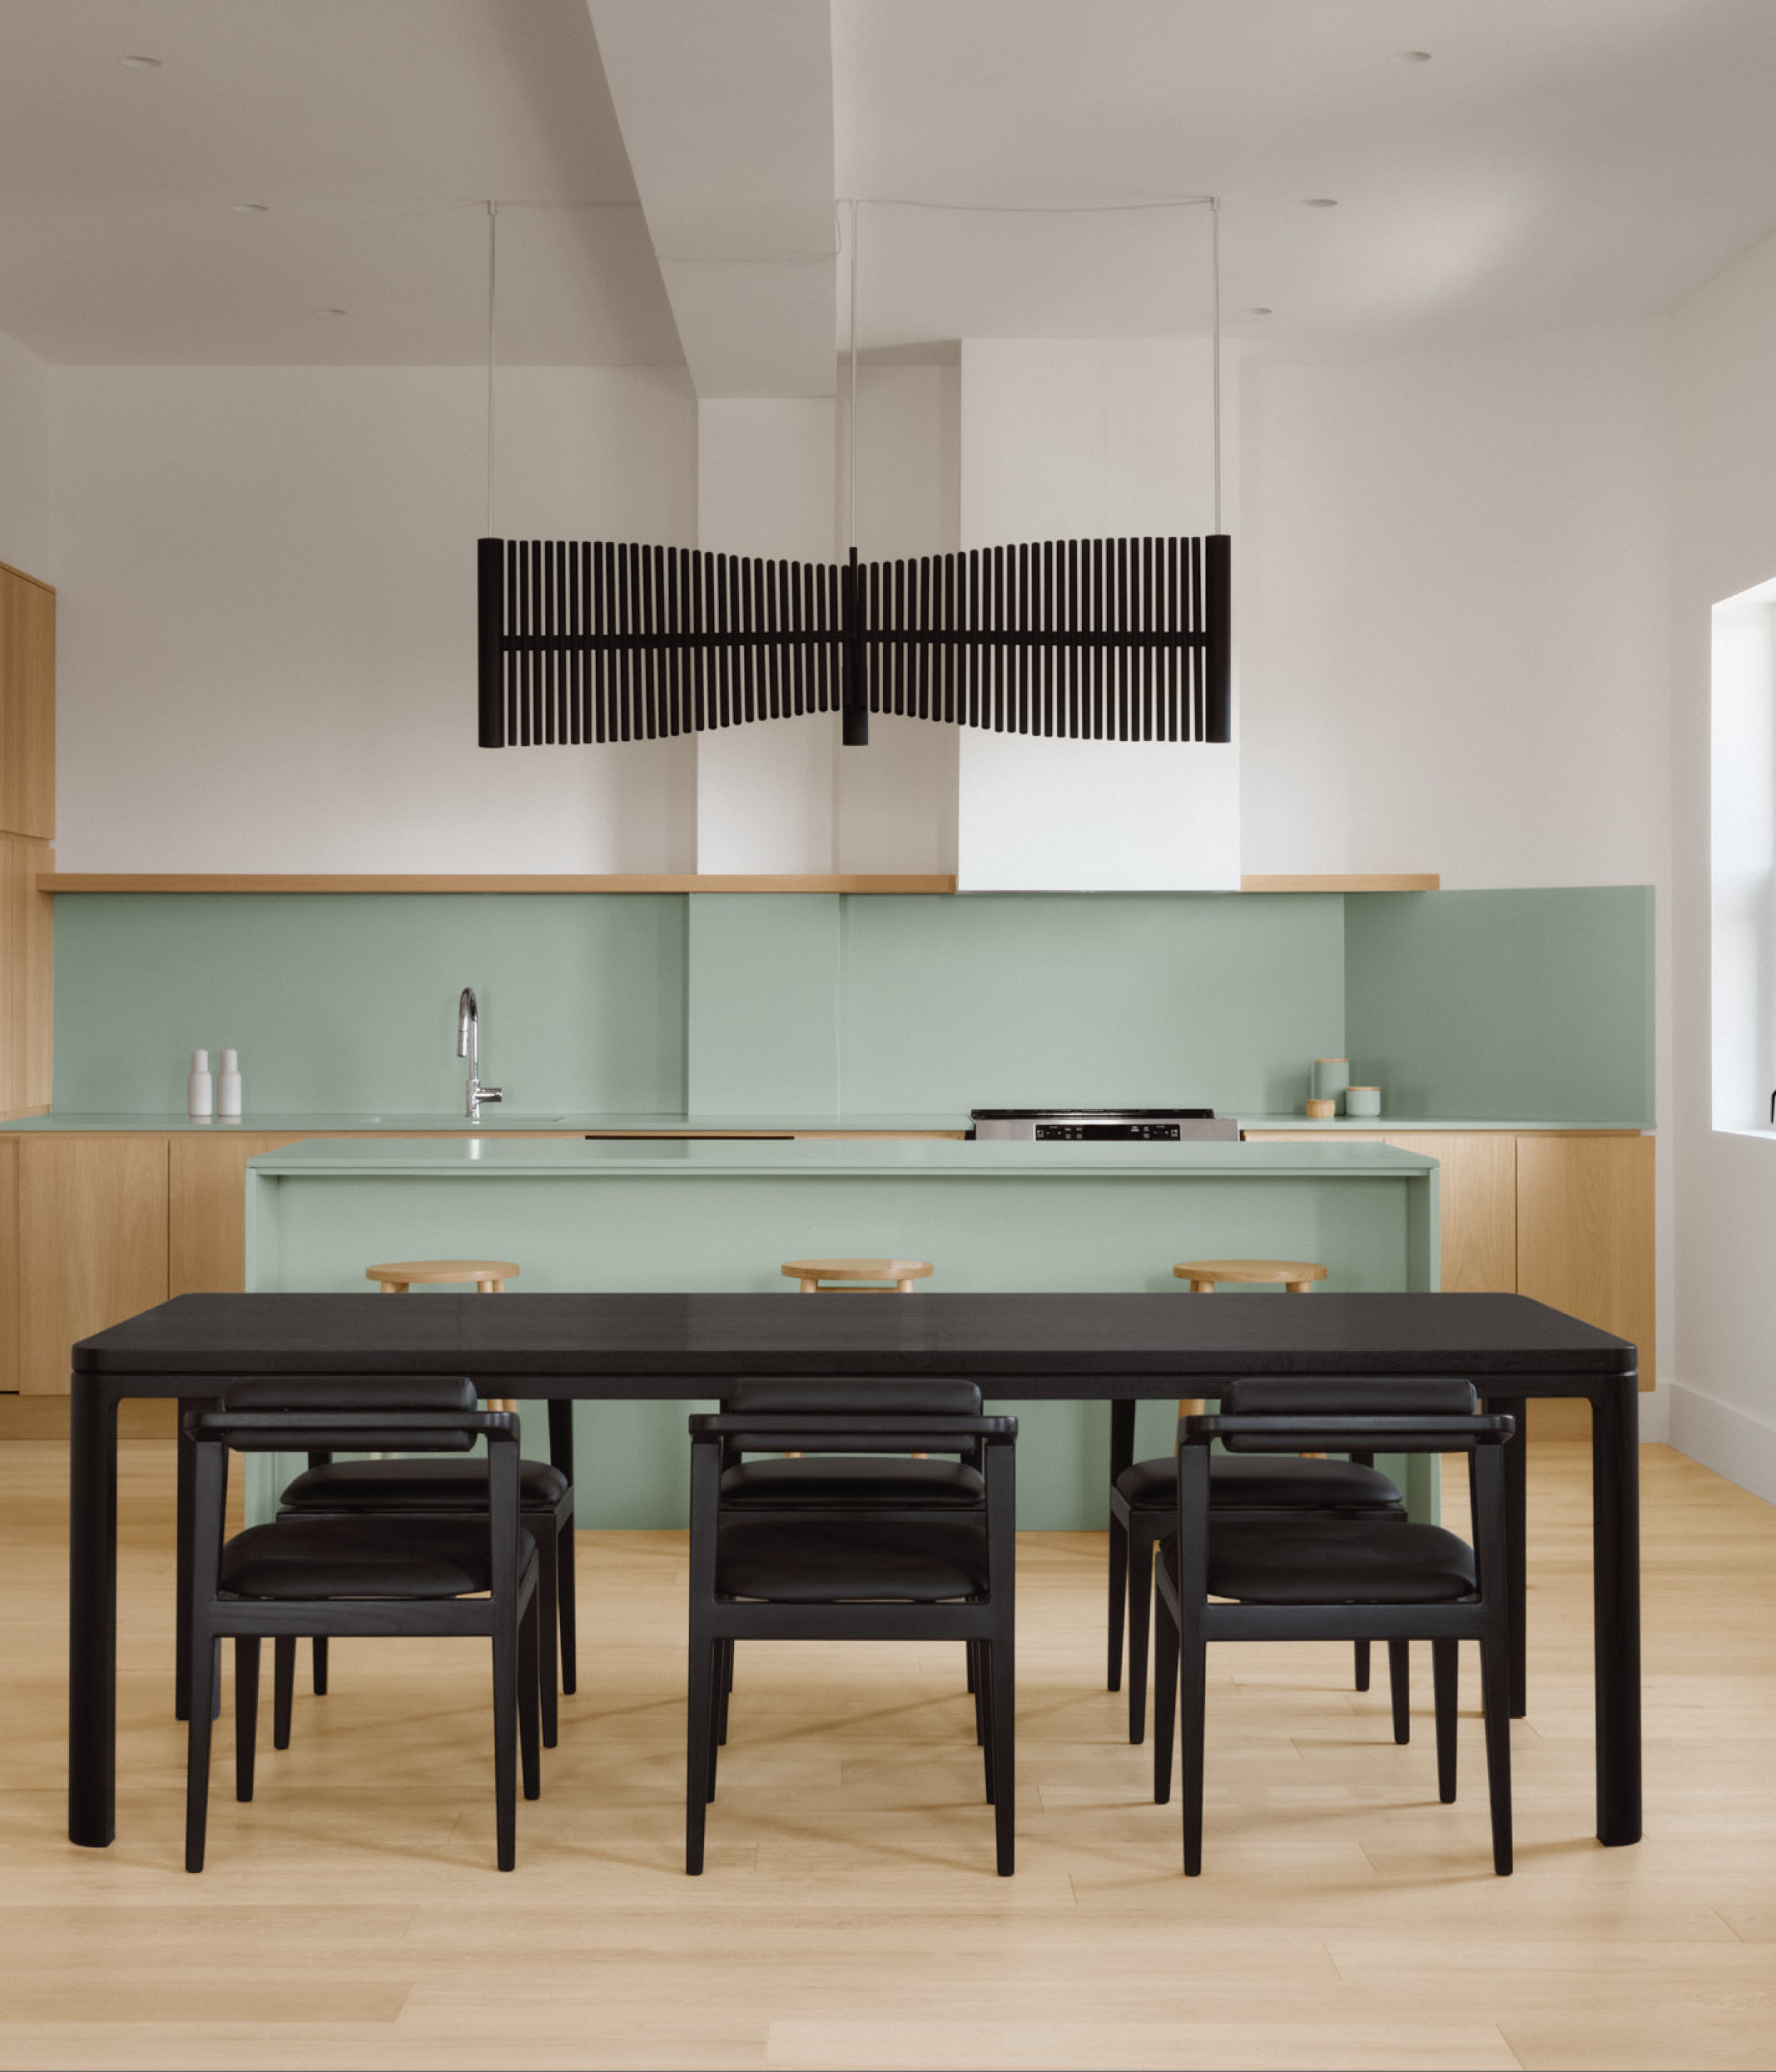 All black Nord table set in a colorful kitchen